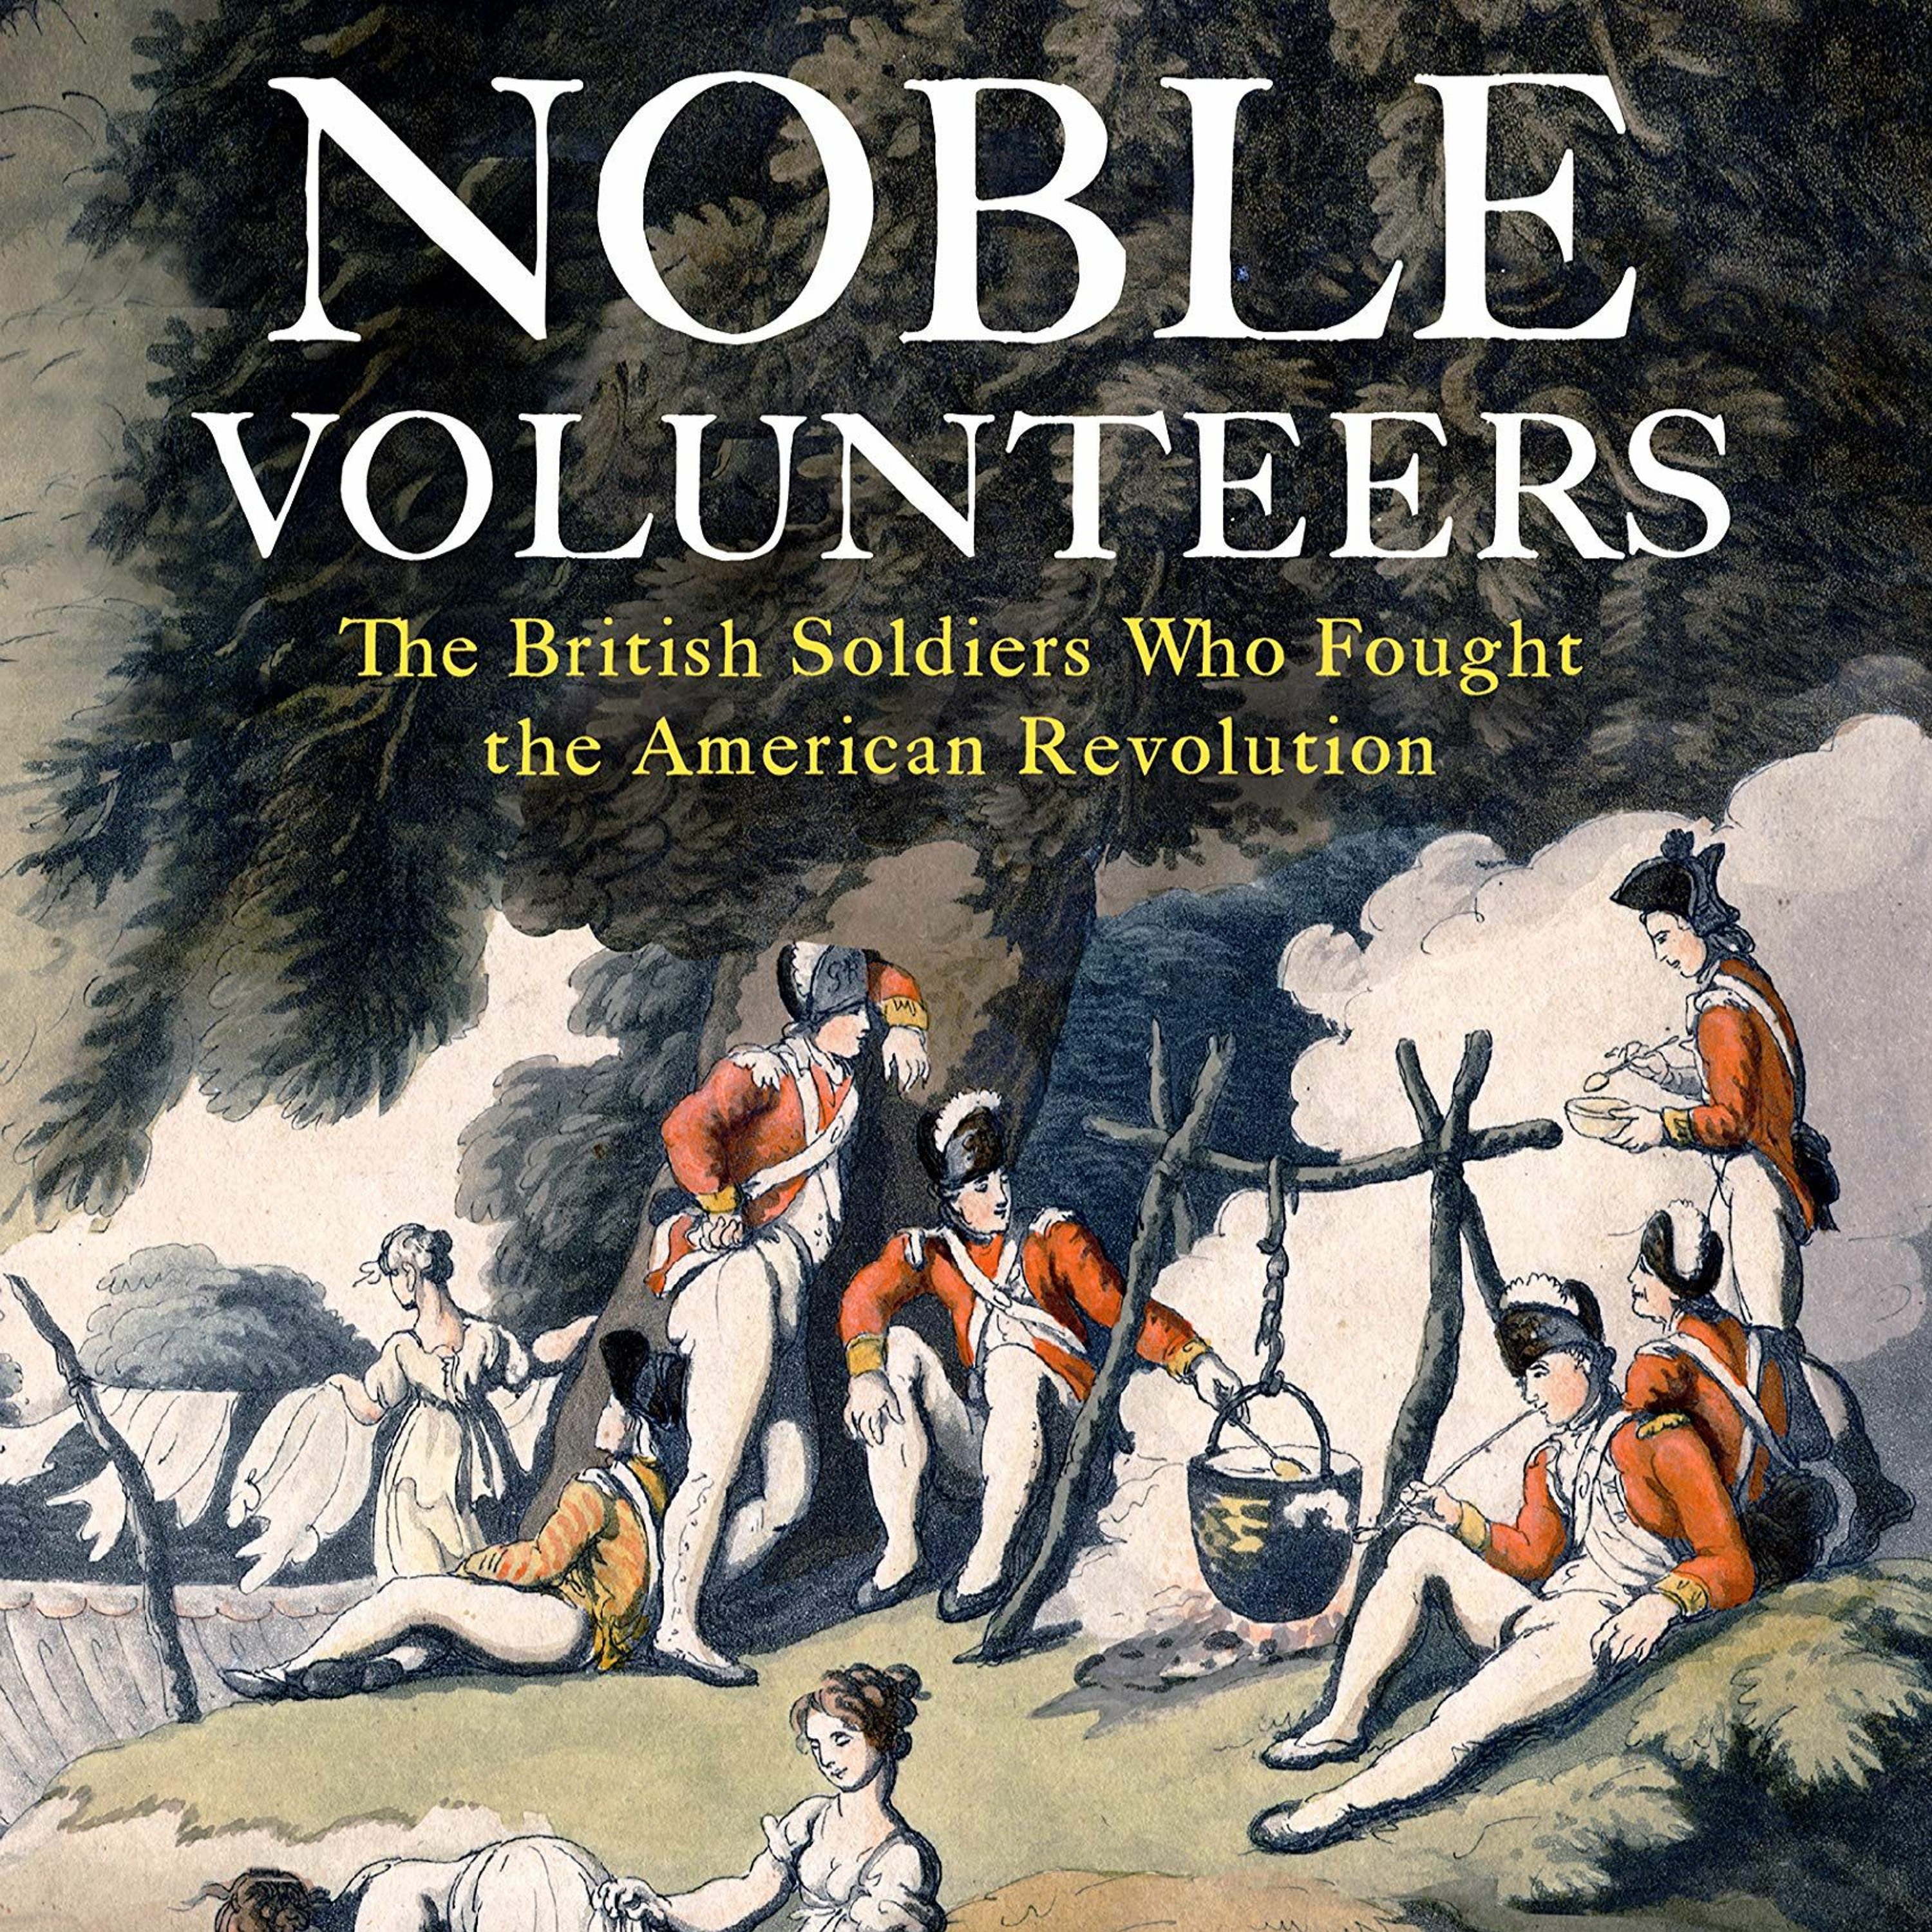 Don Hagist, ”Noble Volunteers: The British Soldiers Who Fought the American Revolution”